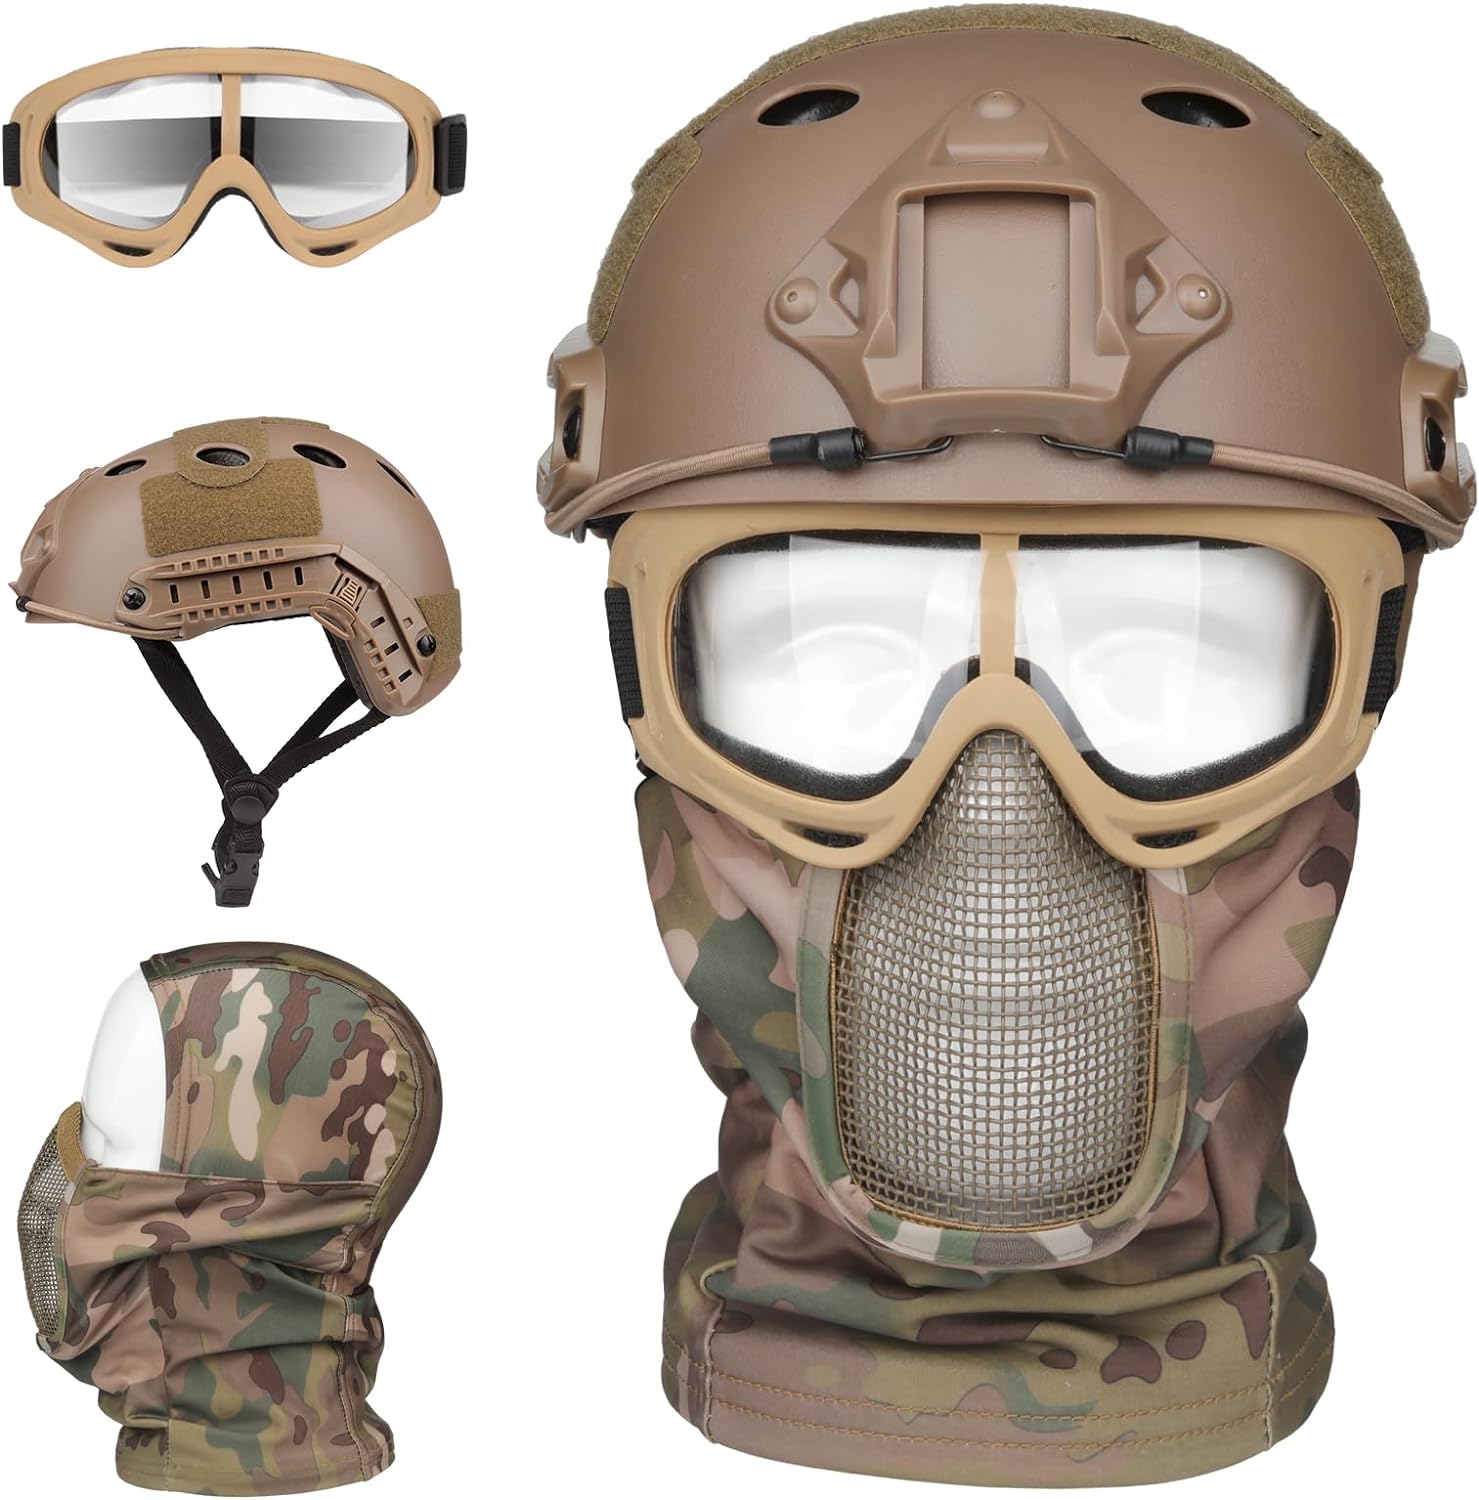 Fansport Airsoft Mask Tactical Goggles Set, Lower Half Face Mesh Masks  Foldable Steel mesh mask Airsoft Protective Mask with Goggles Set for  Hunting